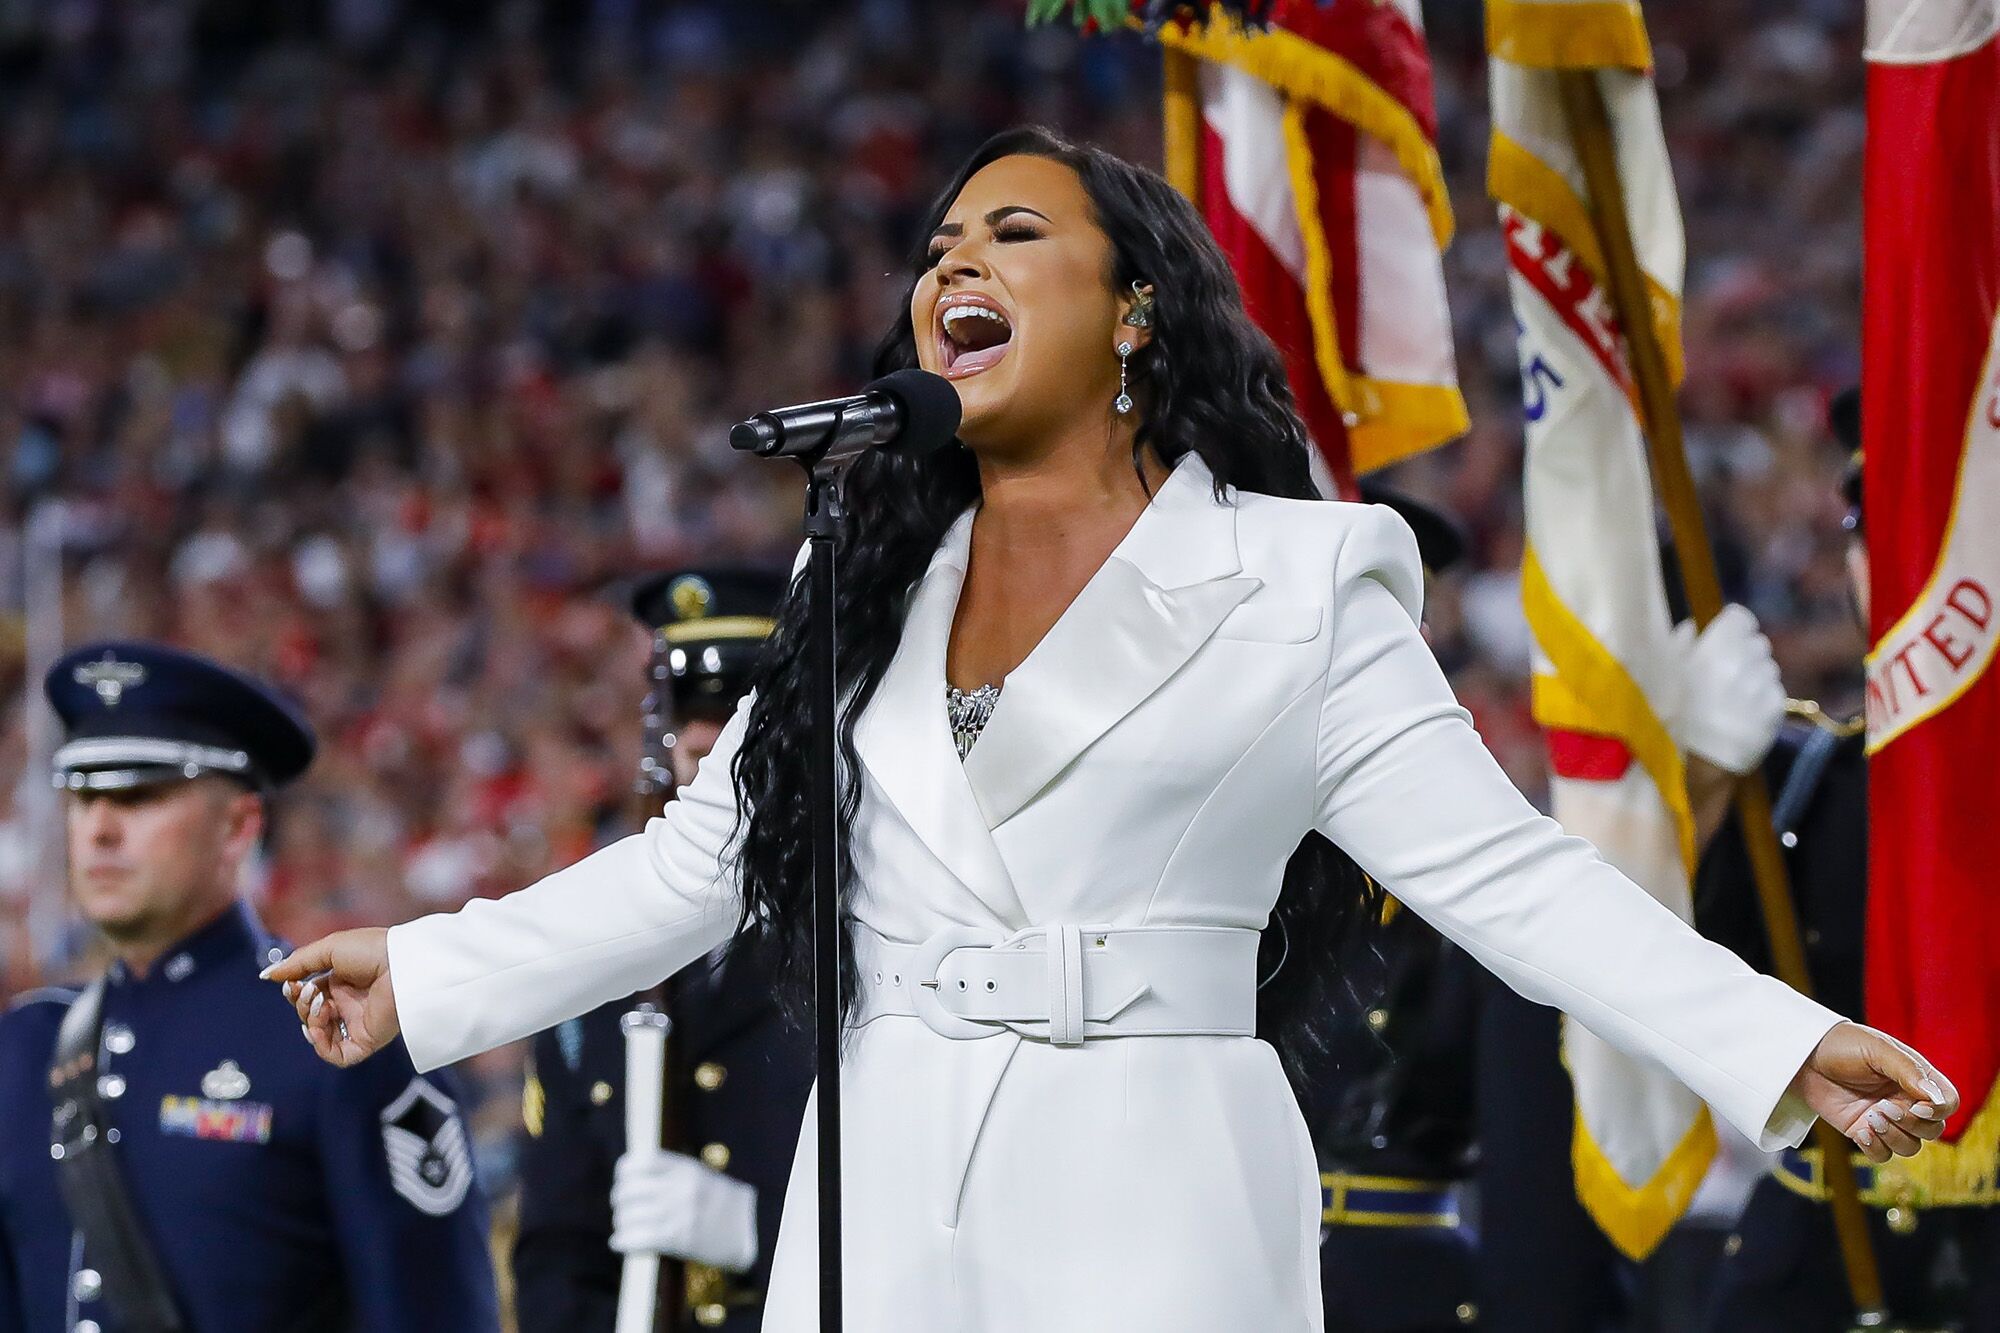 Demi Lovato performs the national anthem before the 2020 Super Bowl | Source: Getty Images